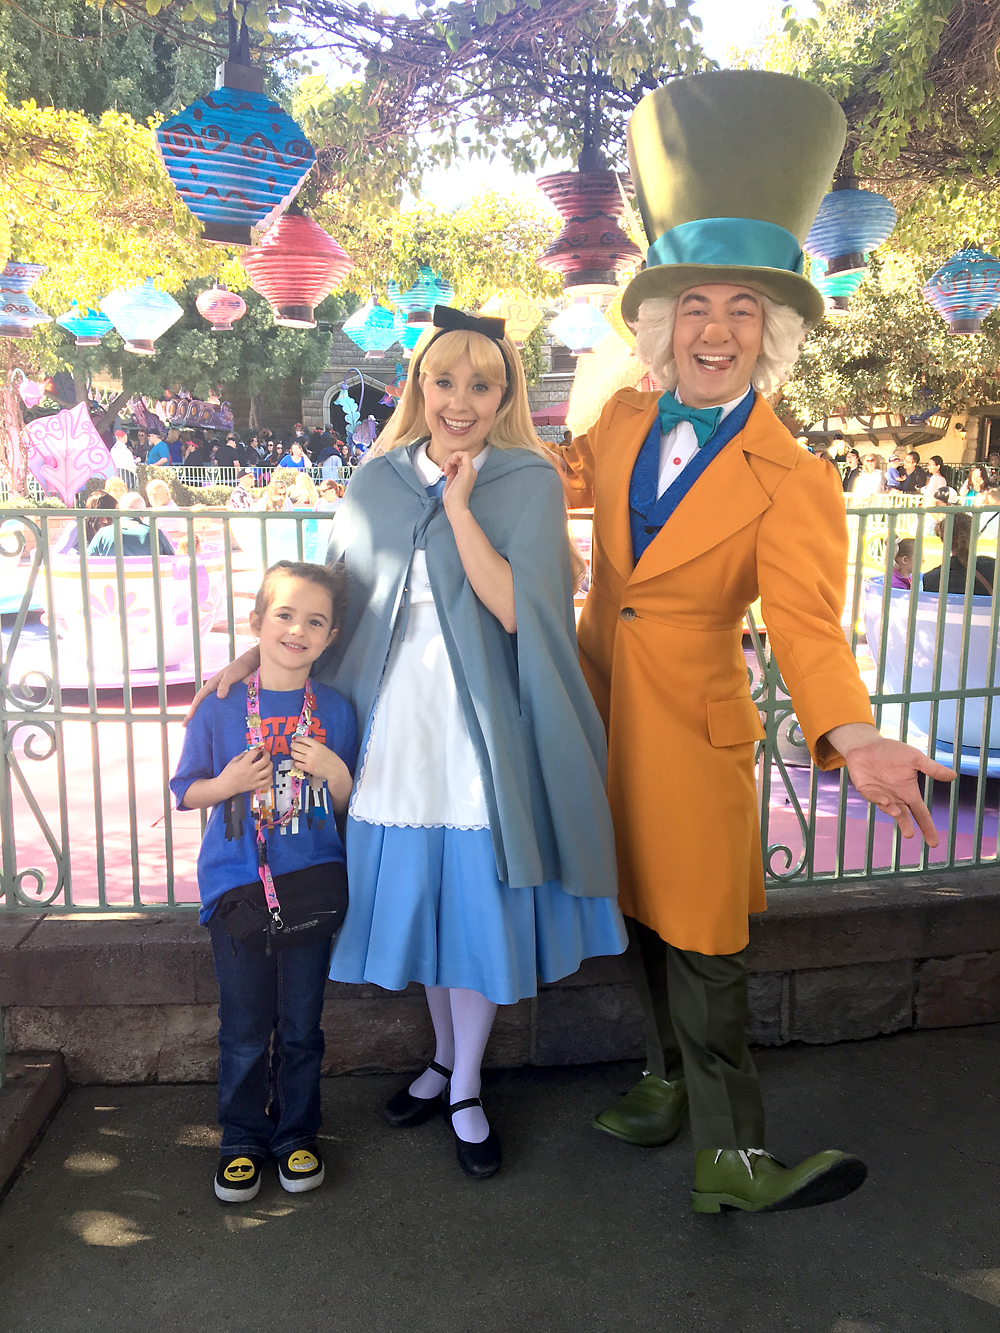 Girl posing with Disney characters, Alice and the Mad Hatter